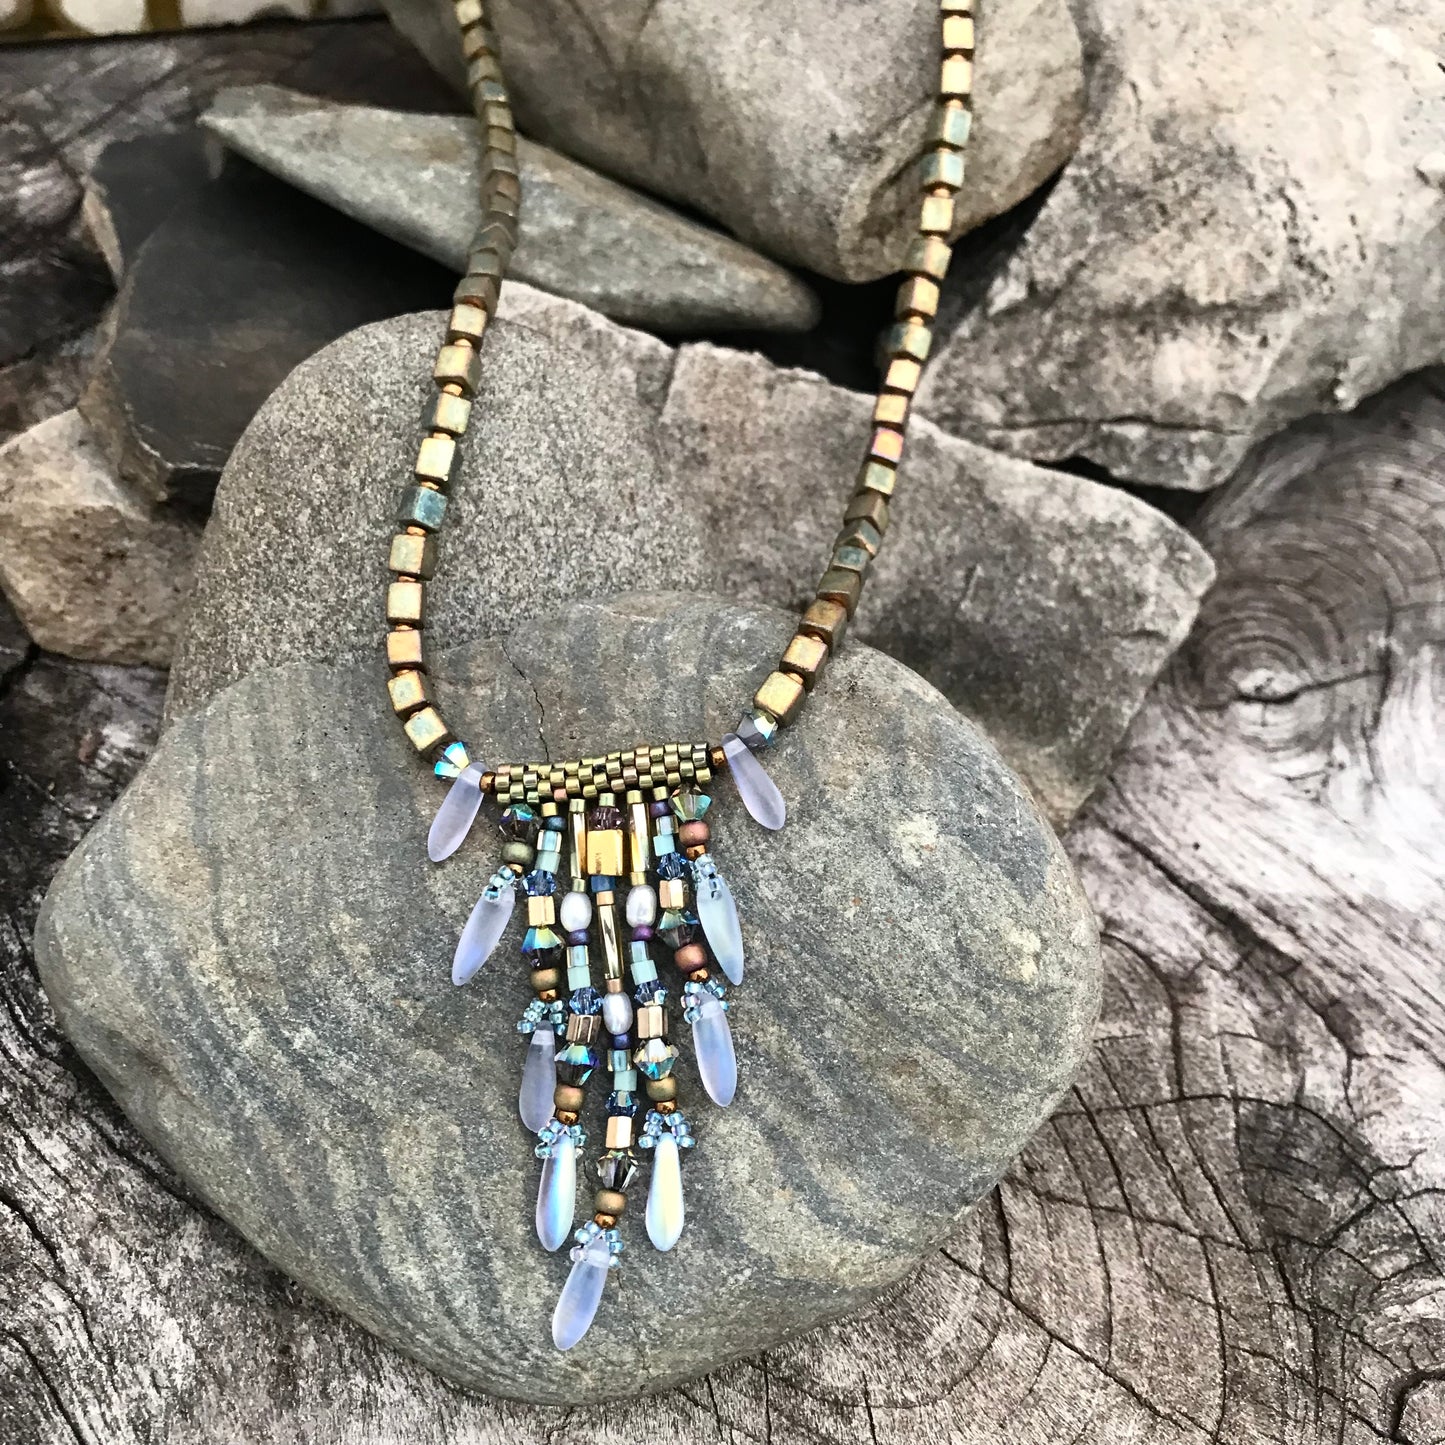 Fringy Mermaid Necklace - 7 strands